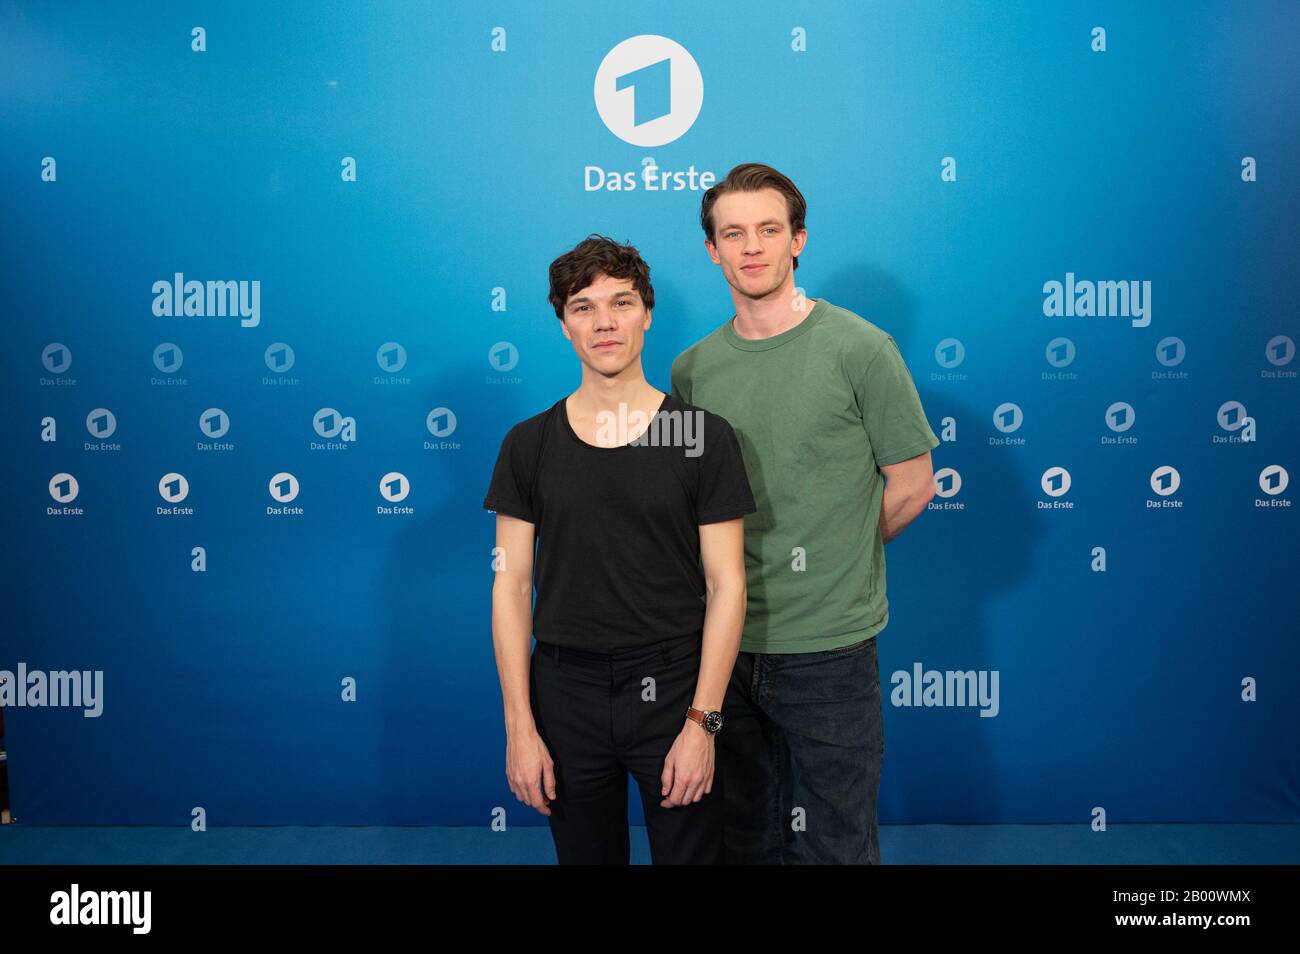 Hamburg, Germany. 17th Feb, 2020. The actors Sebastian Urzendowsky (l) and Jannis Niewöhner, taken during a photo session for the film 'Der Überläufer'. The first shows the filming as a two-part film on 8 April and 10 April 2020. Credit: Daniel Reinhardt/dpa/Alamy Live News Stock Photo